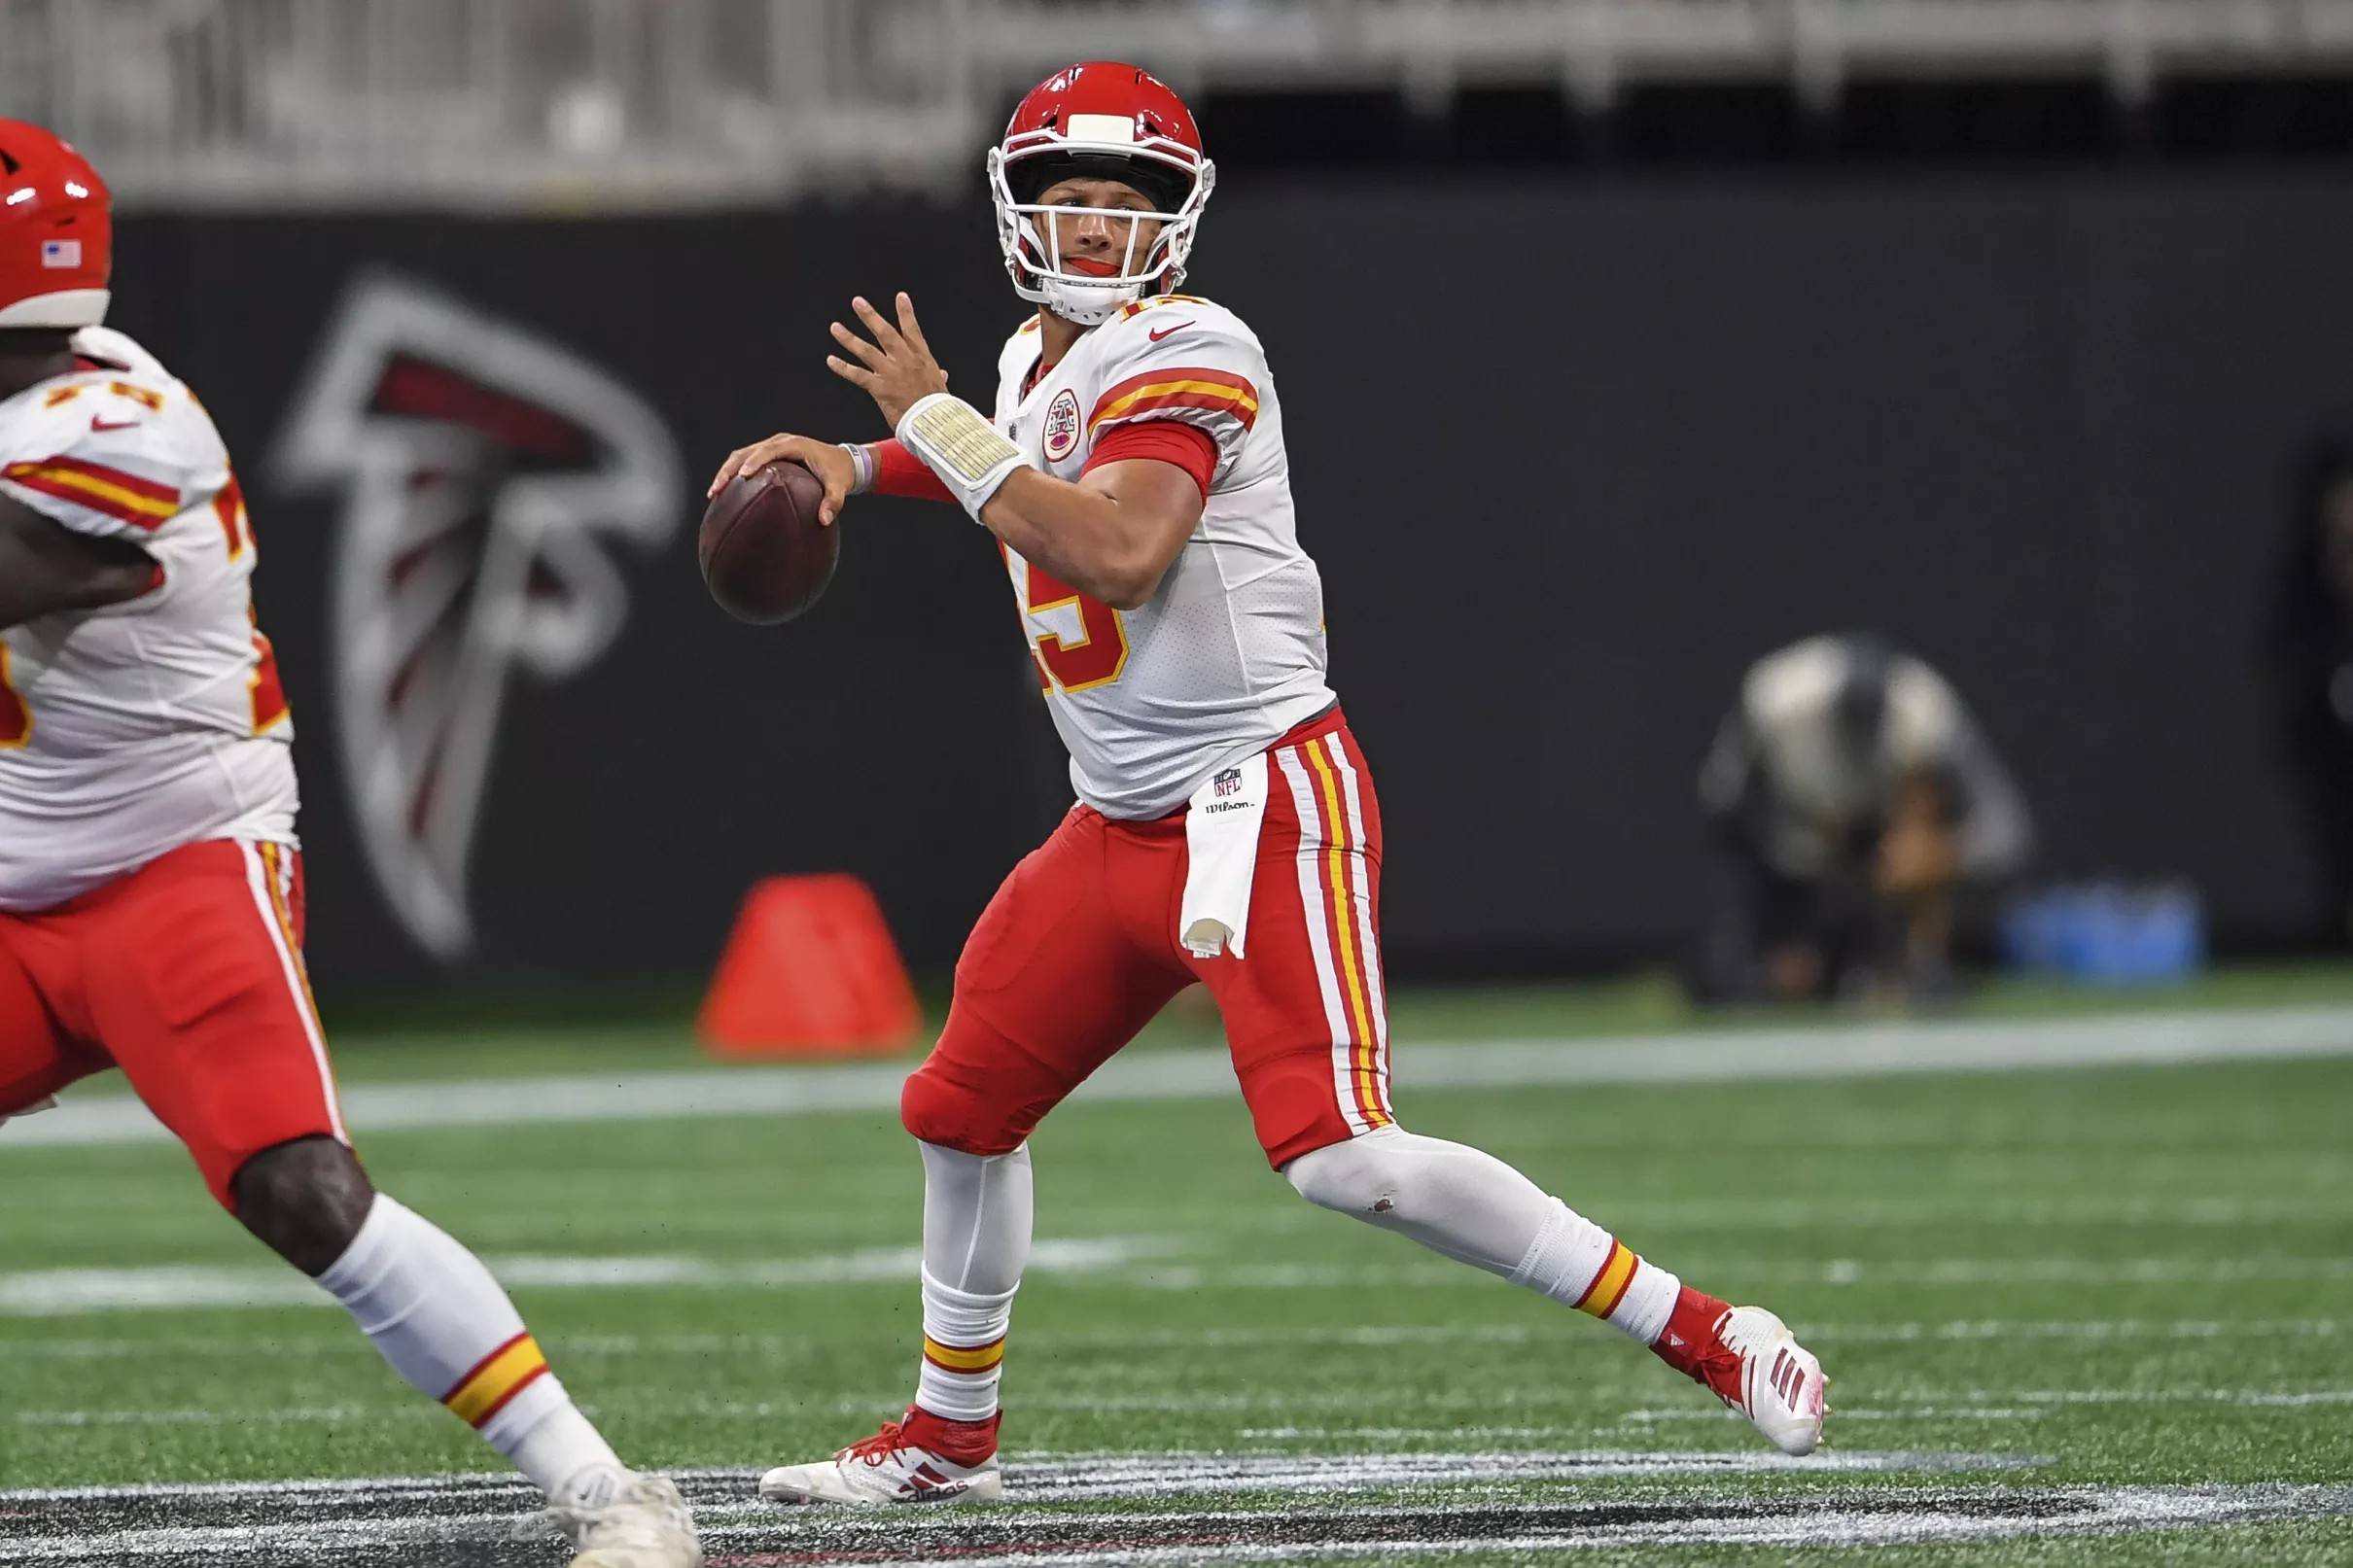 Twitter reacts to Patrick Mahomes' ridiculous touchdown pass.